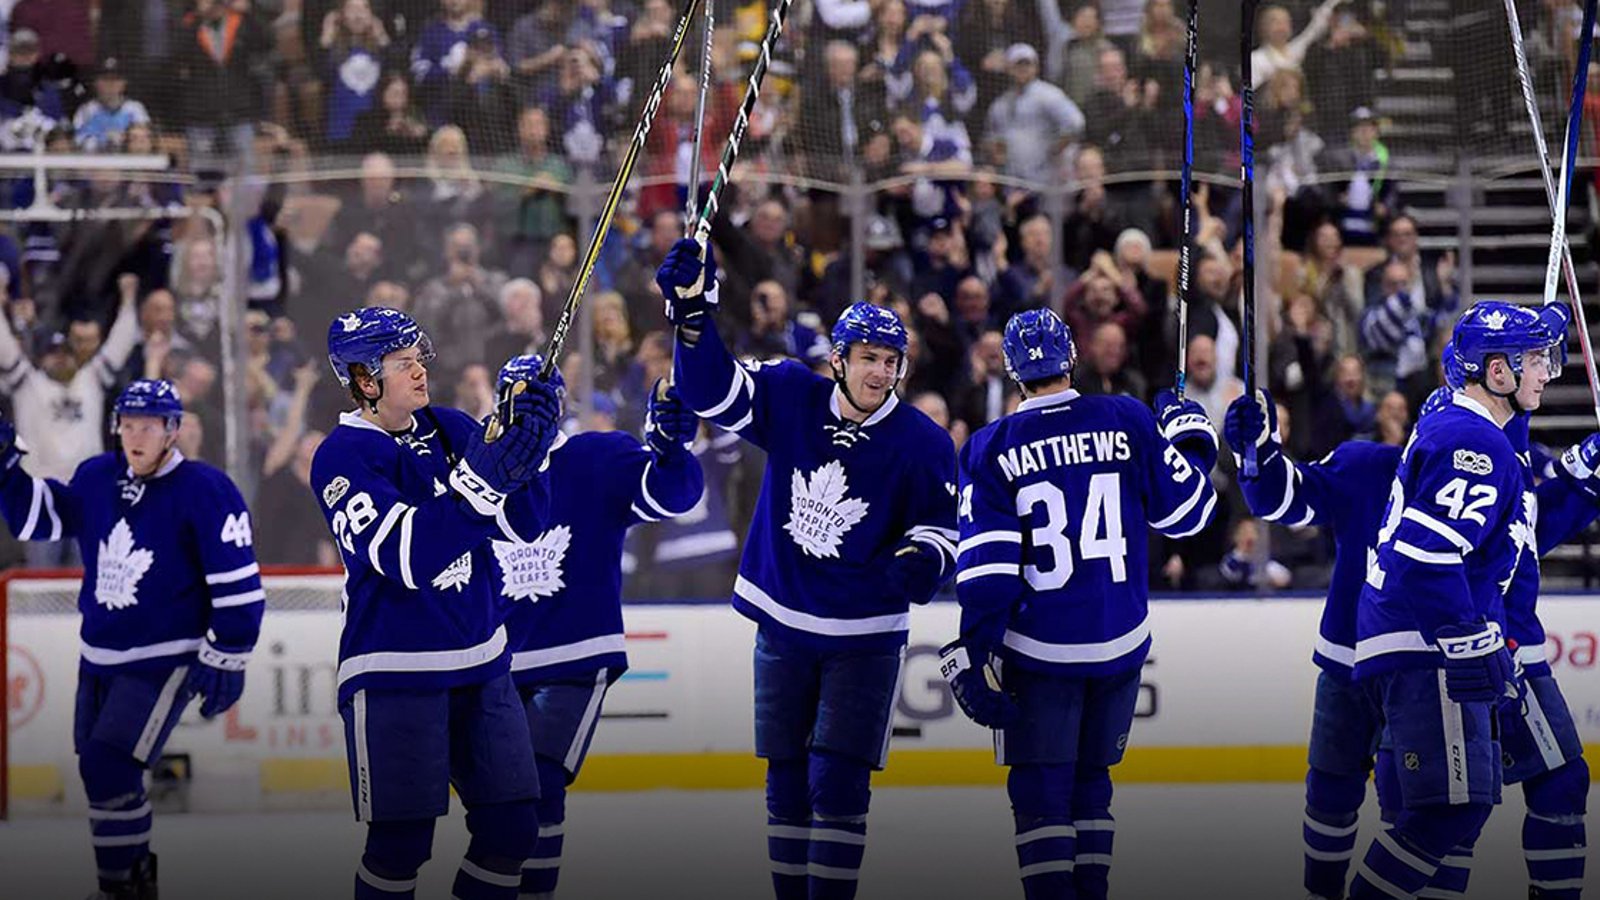 Leafs player passes two NHL legends